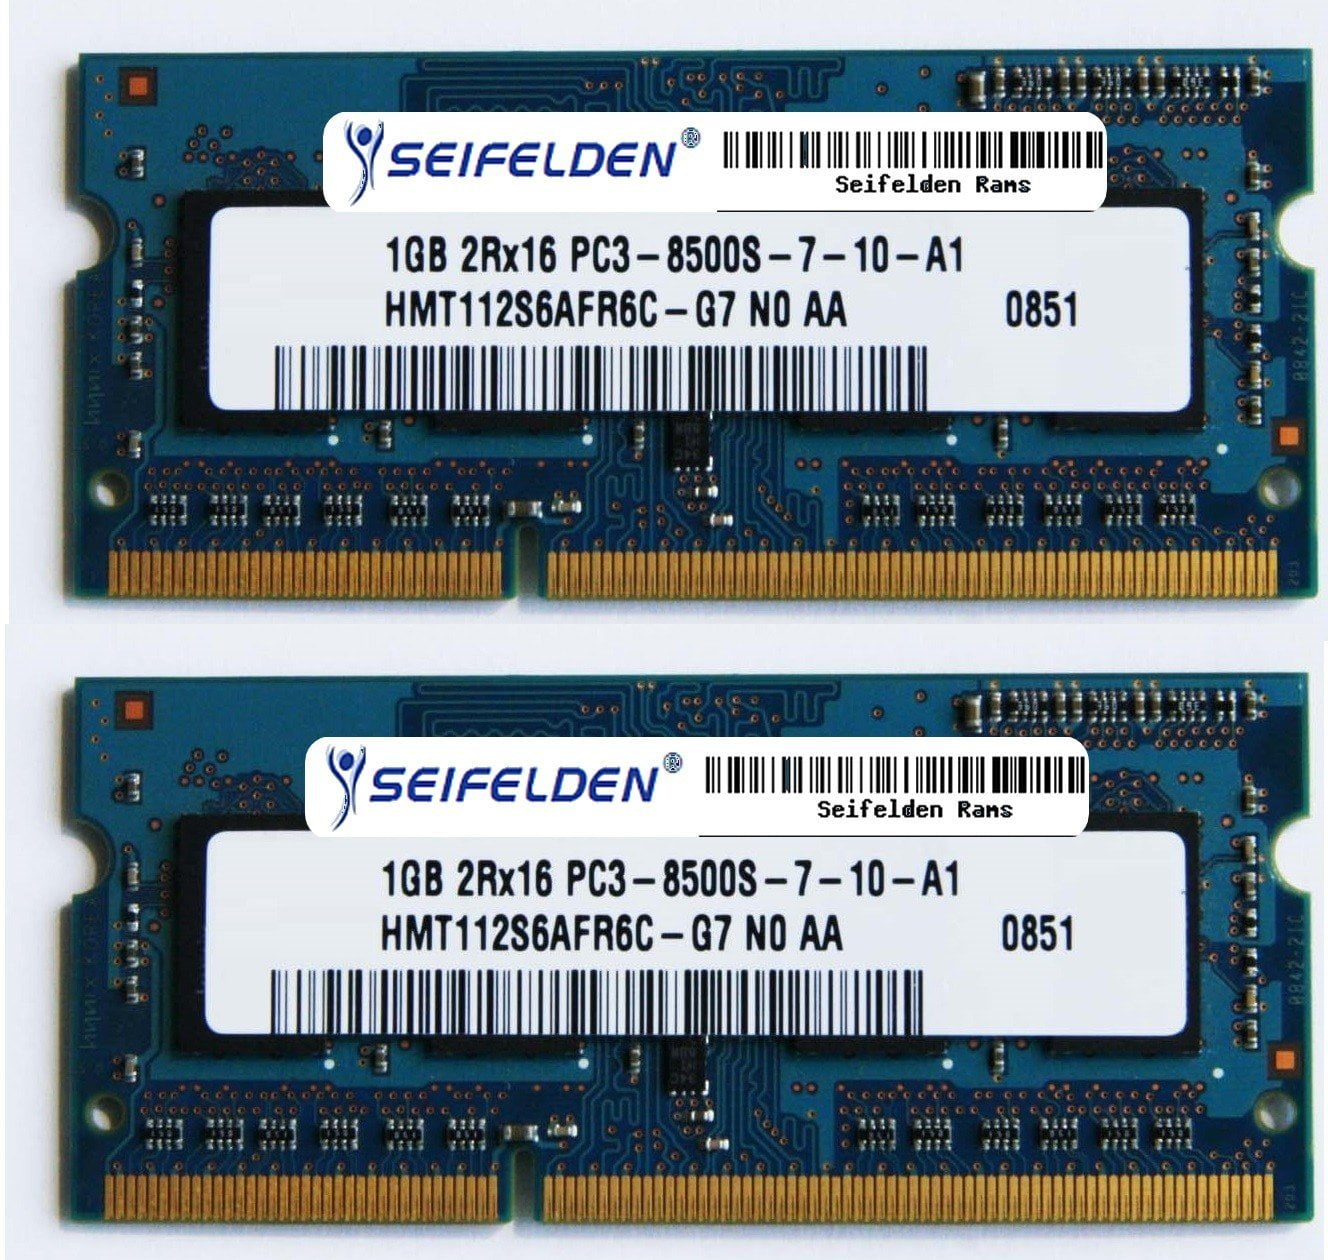 4GB Team High Performance Memory RAM Upgrade Single Stick For Toshiba Satellite L635-S3012 L635-S3012 B N Laptop The Memory Kit comes with Life Time Warranty. 